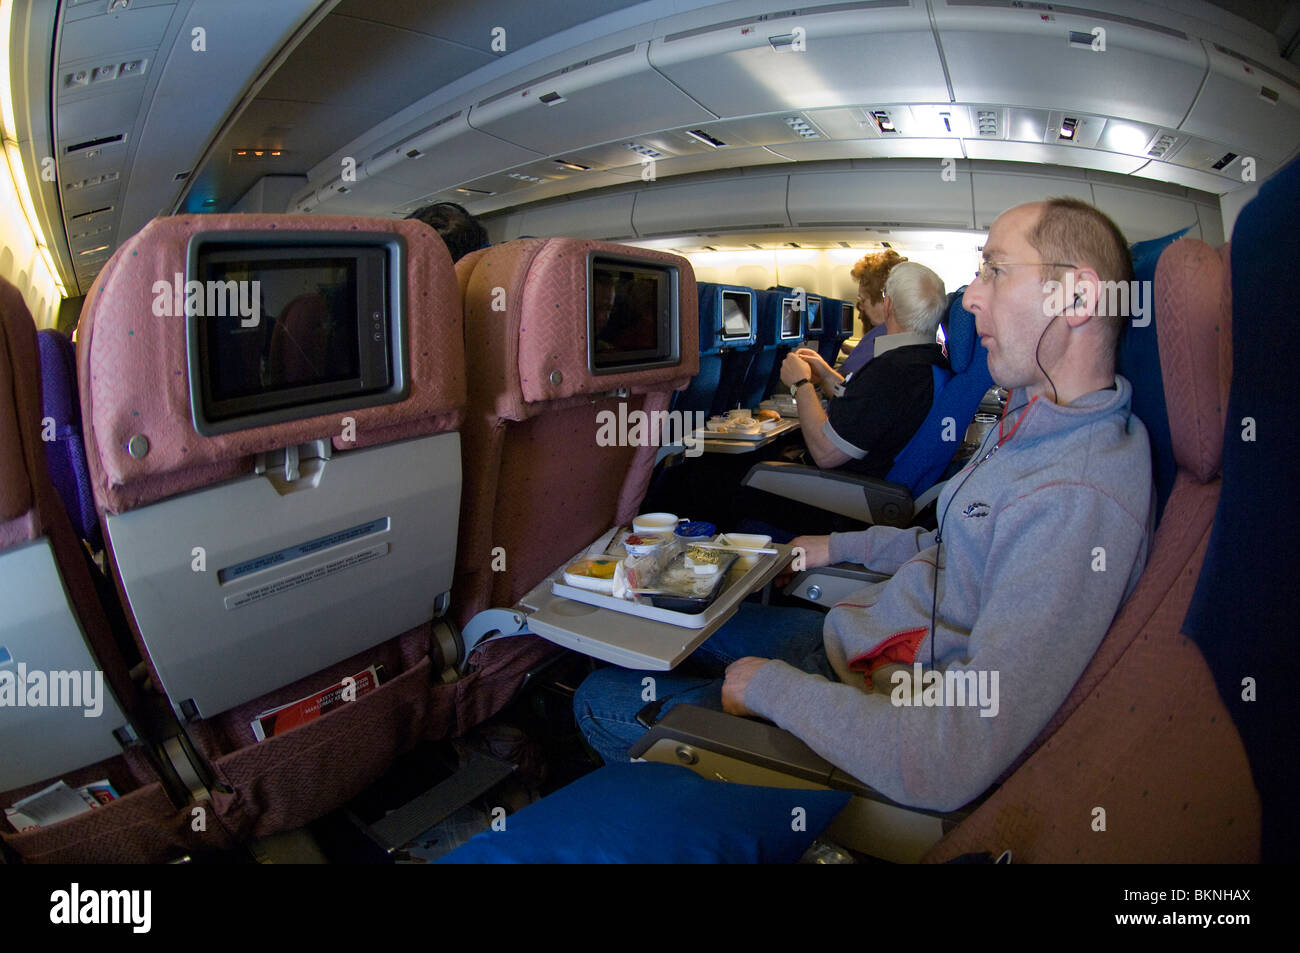 Interior of Boeing B747-400P aircraft, Malaysian Airlines Stock Photo